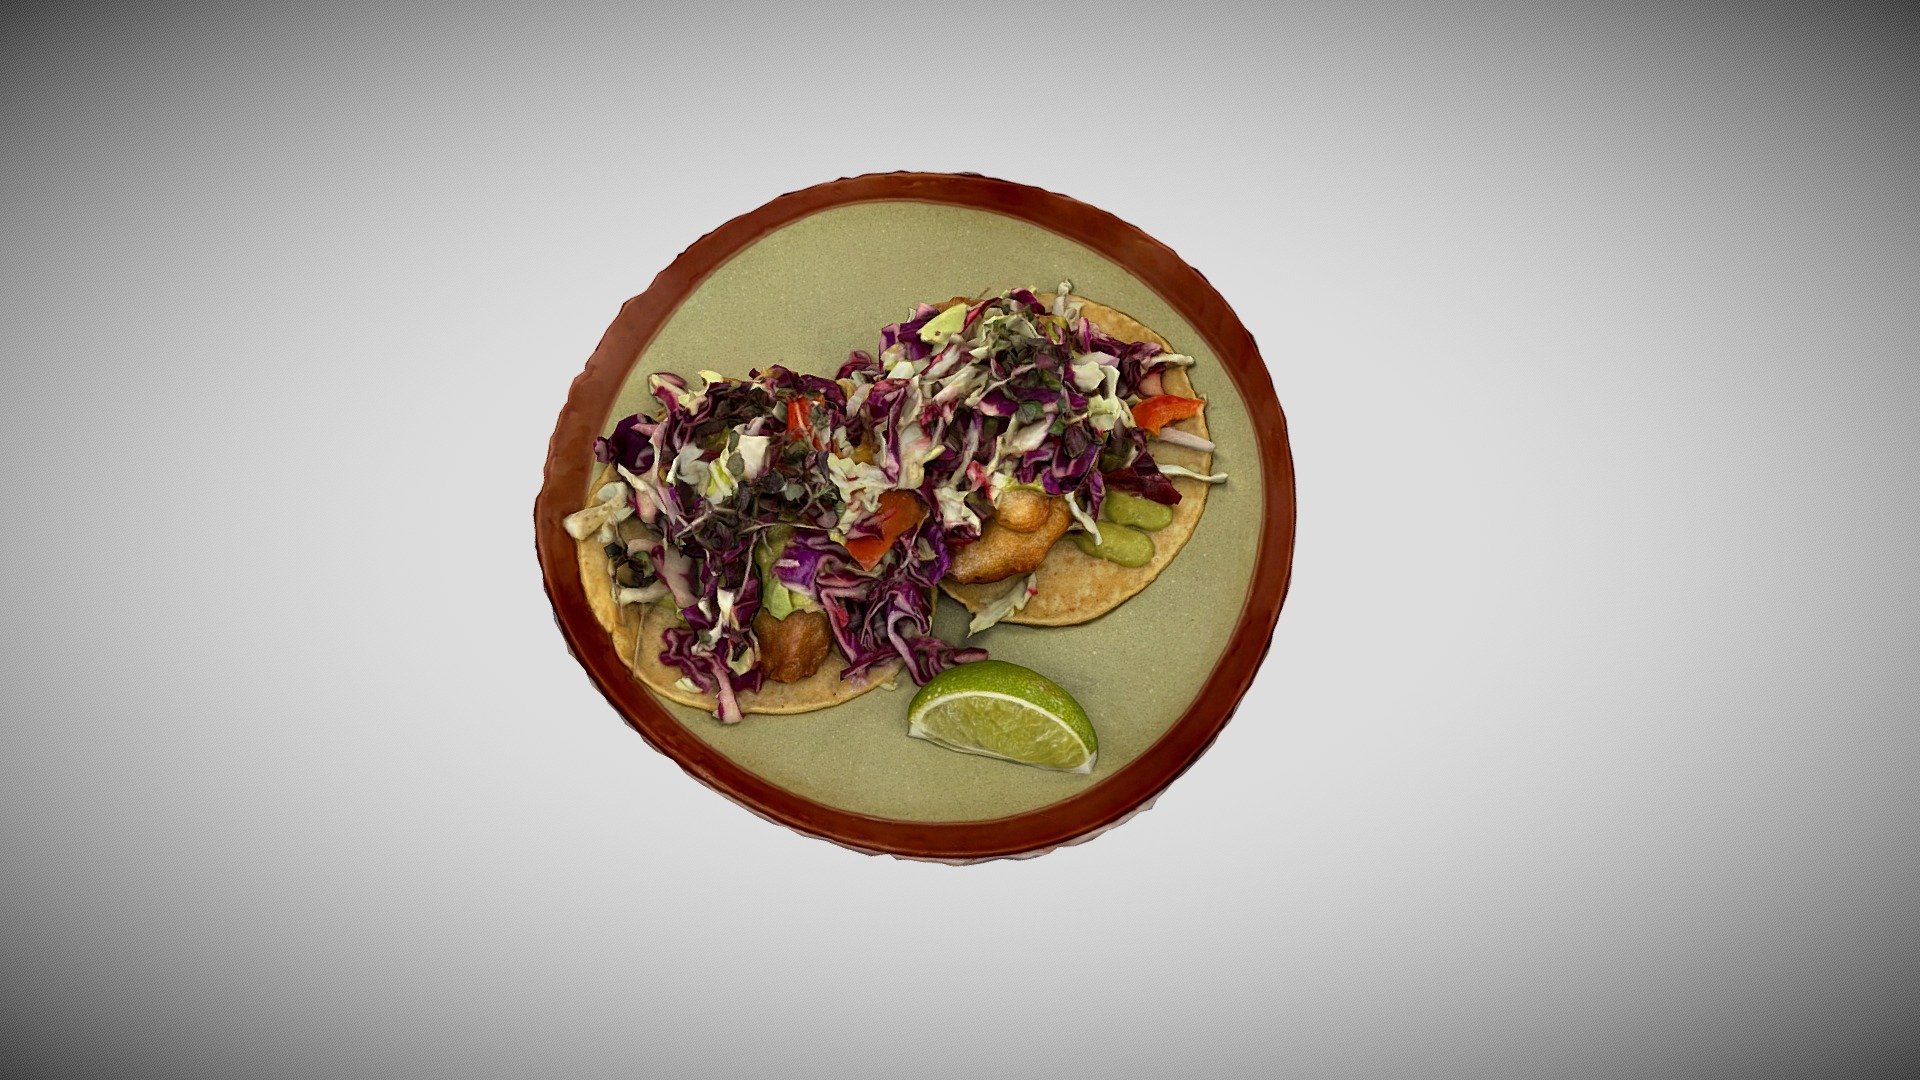 Deep fried fresh caught cod tacos that is served at Copita restaurant in Sausalito, Ca - Baja Style Cod - Buy Royalty Free 3D model by Augmented Reality Marketing Solutions LLC (@AugRealMarketing) 3d model